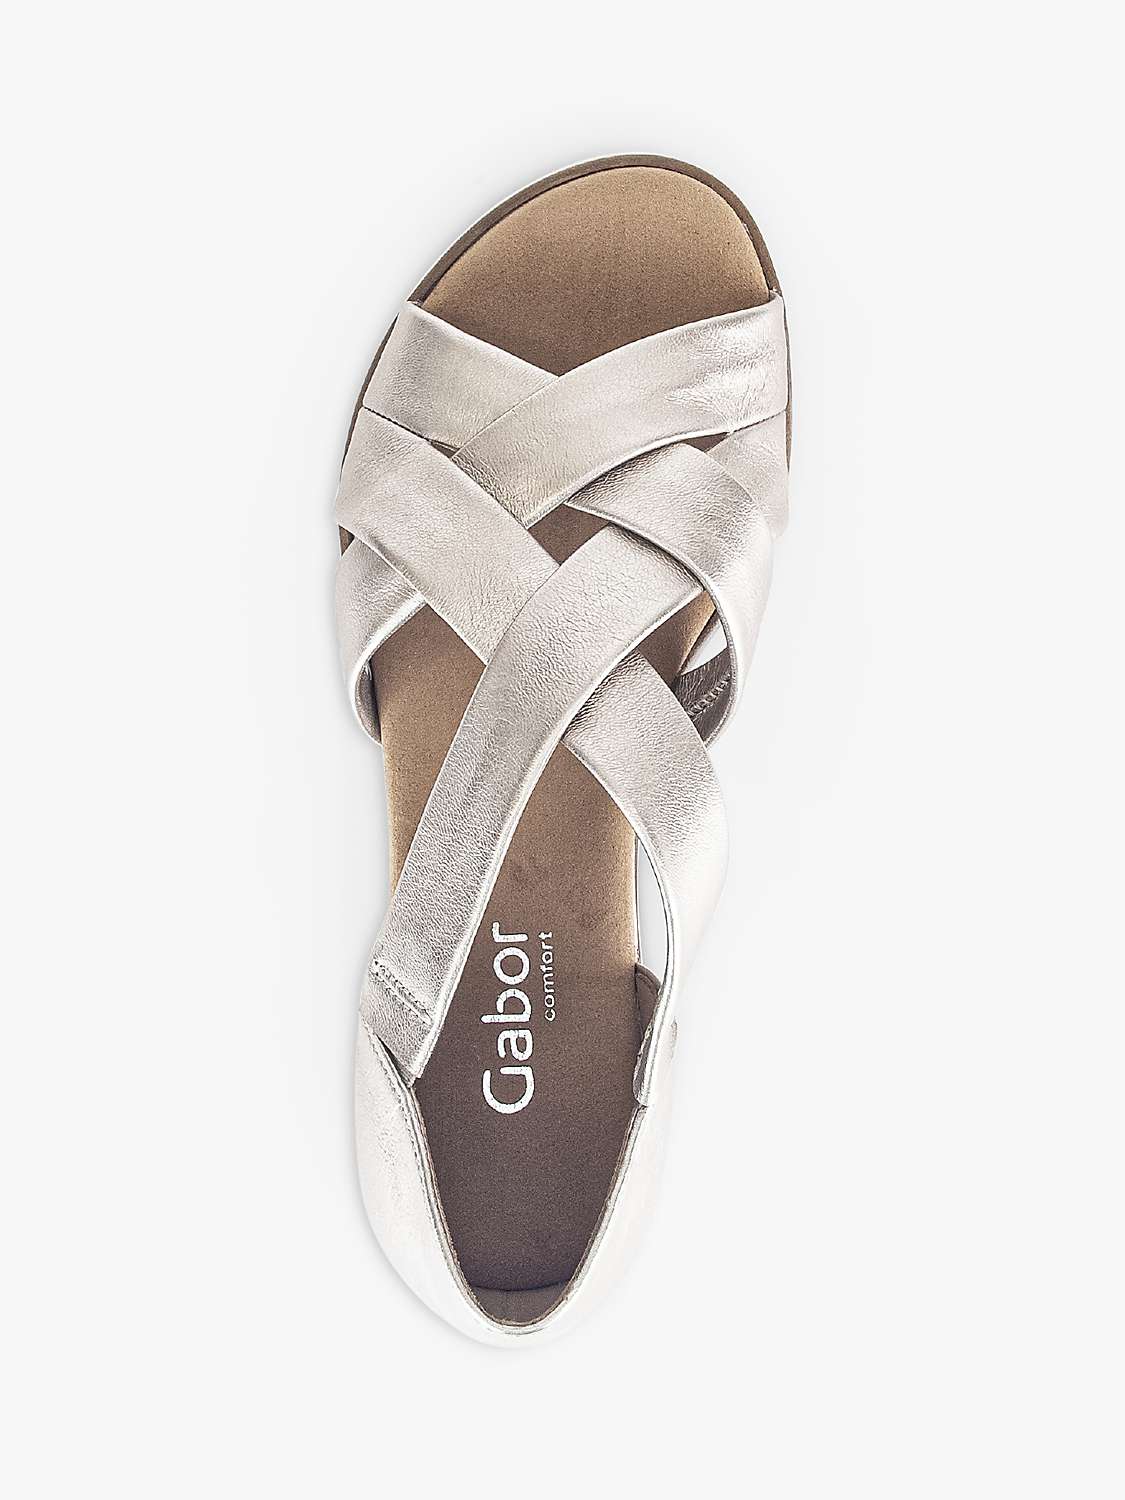 Buy Gabor Truth Wide Fit Multi Cross Strap Wedge Sandals, Puder Online at johnlewis.com